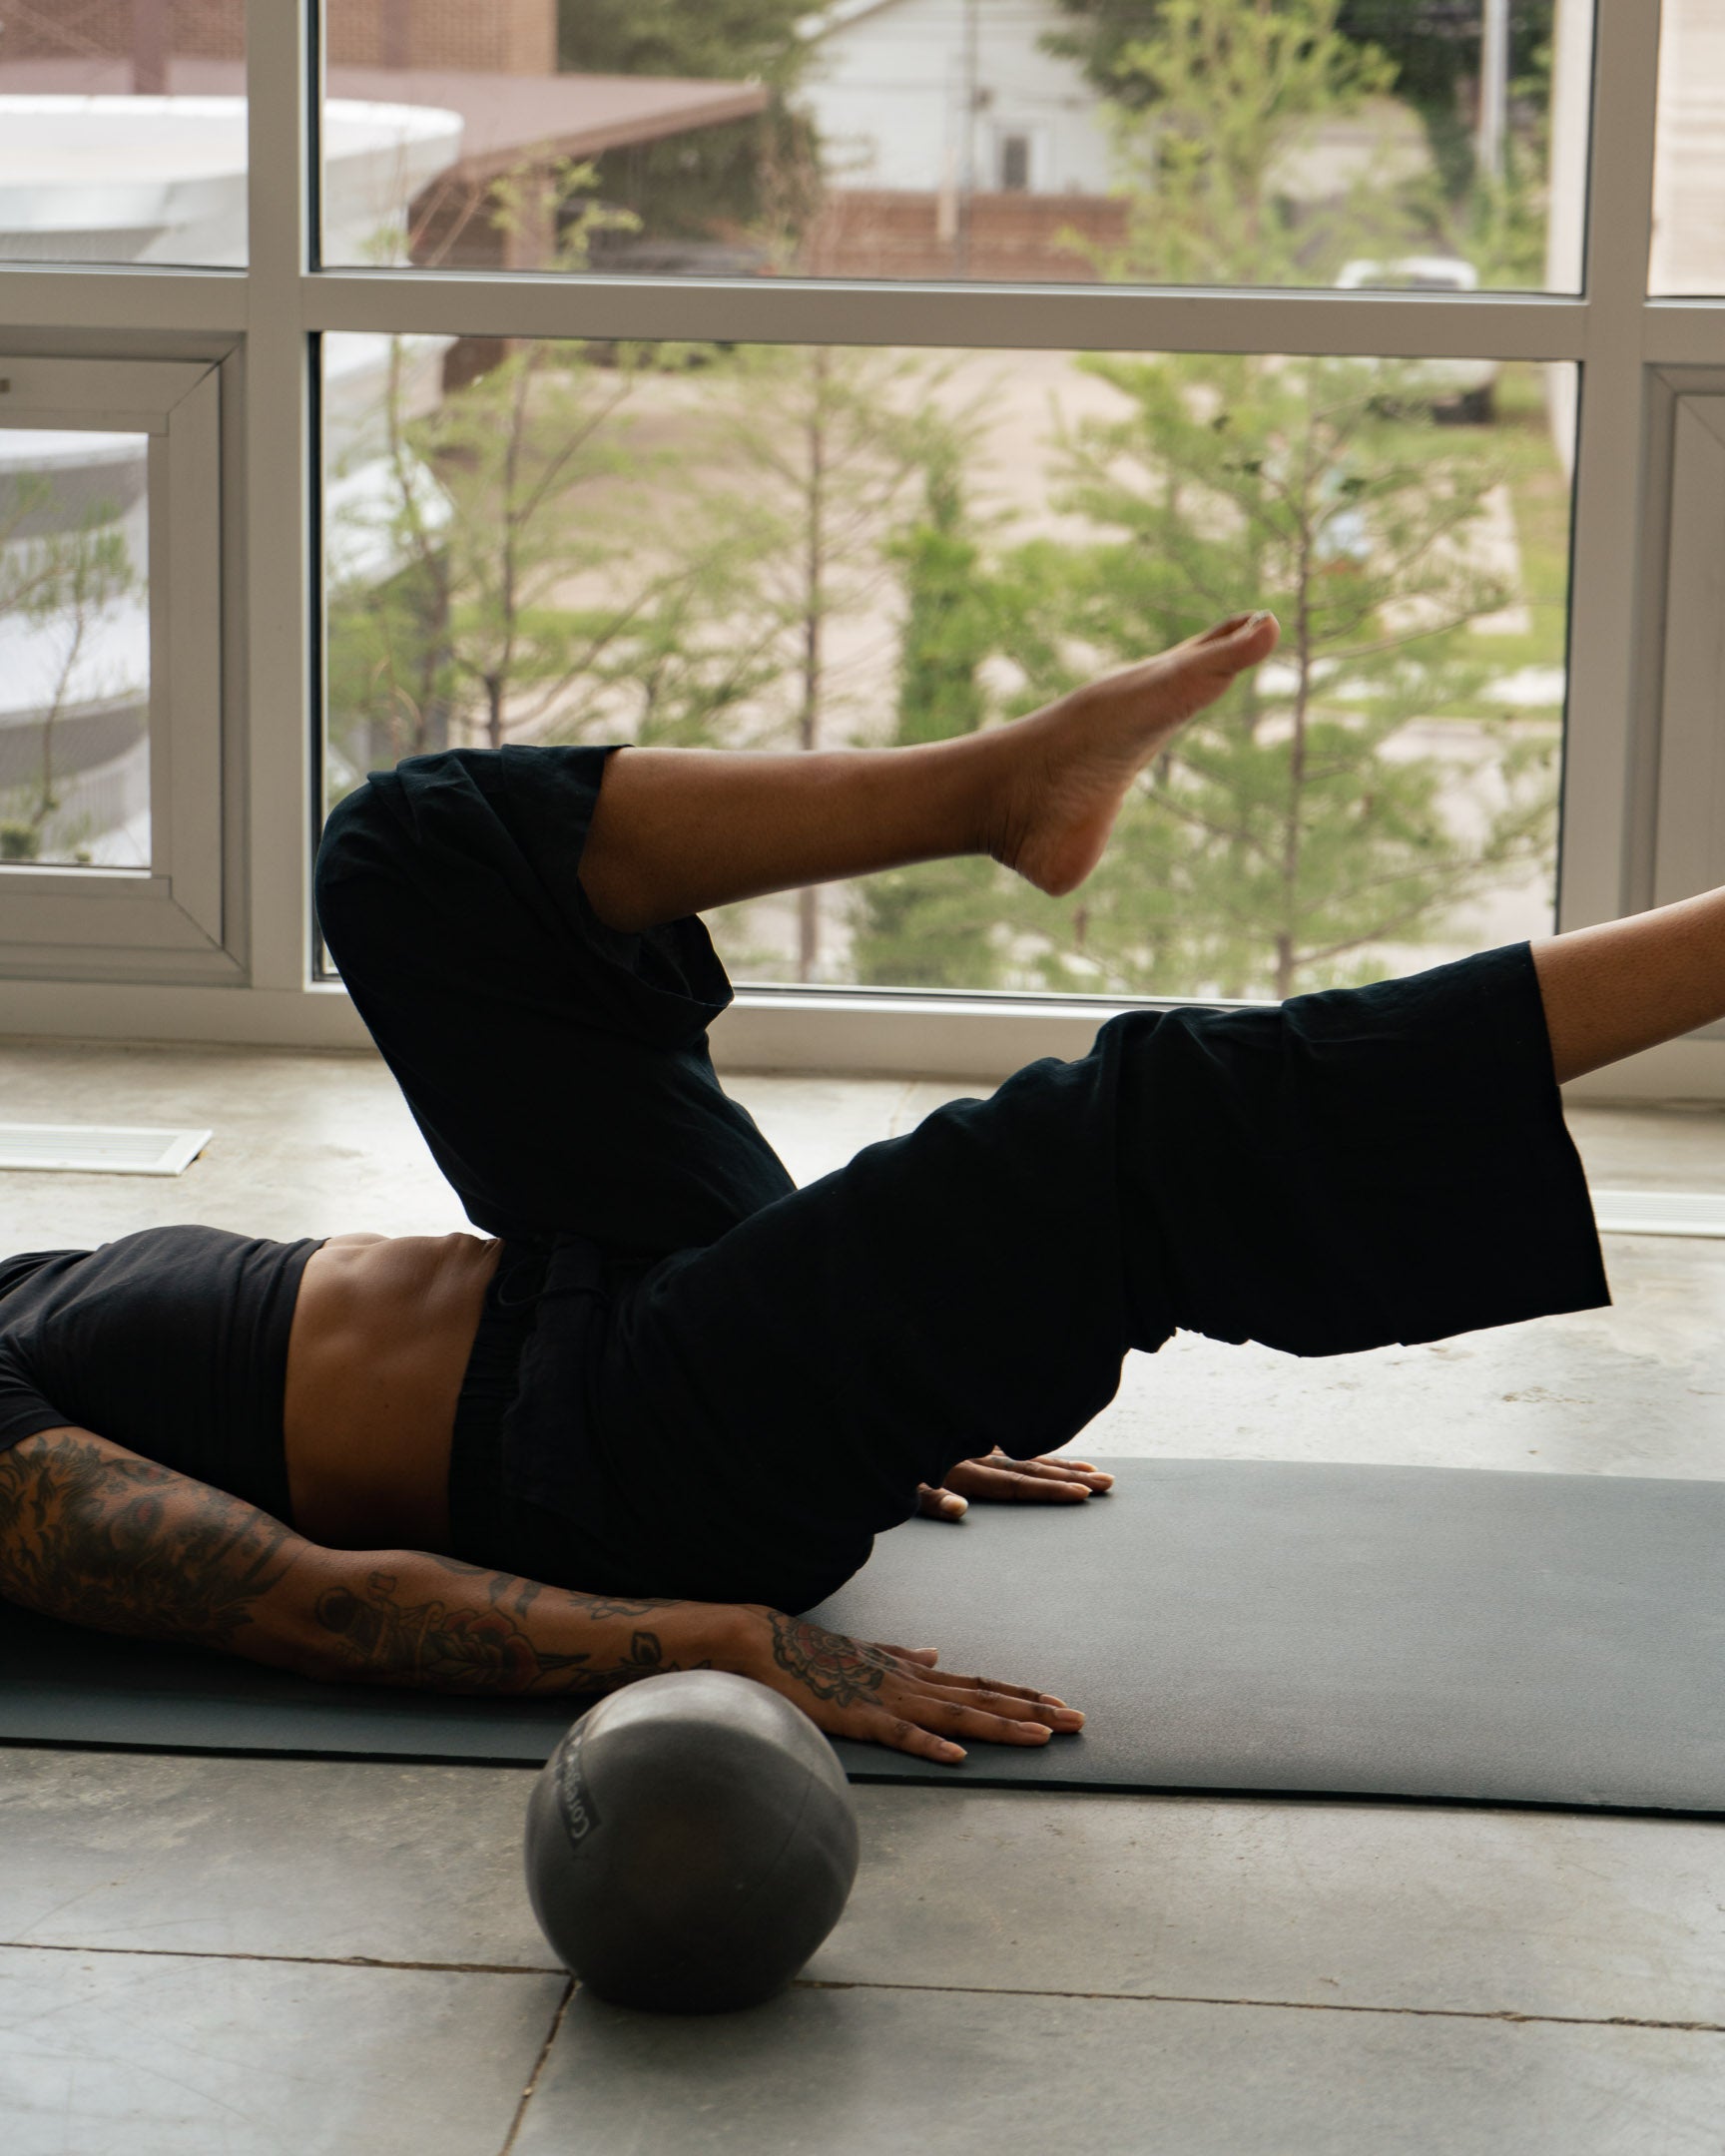 MOVE: Nidra + Touch - June 25th, 8am